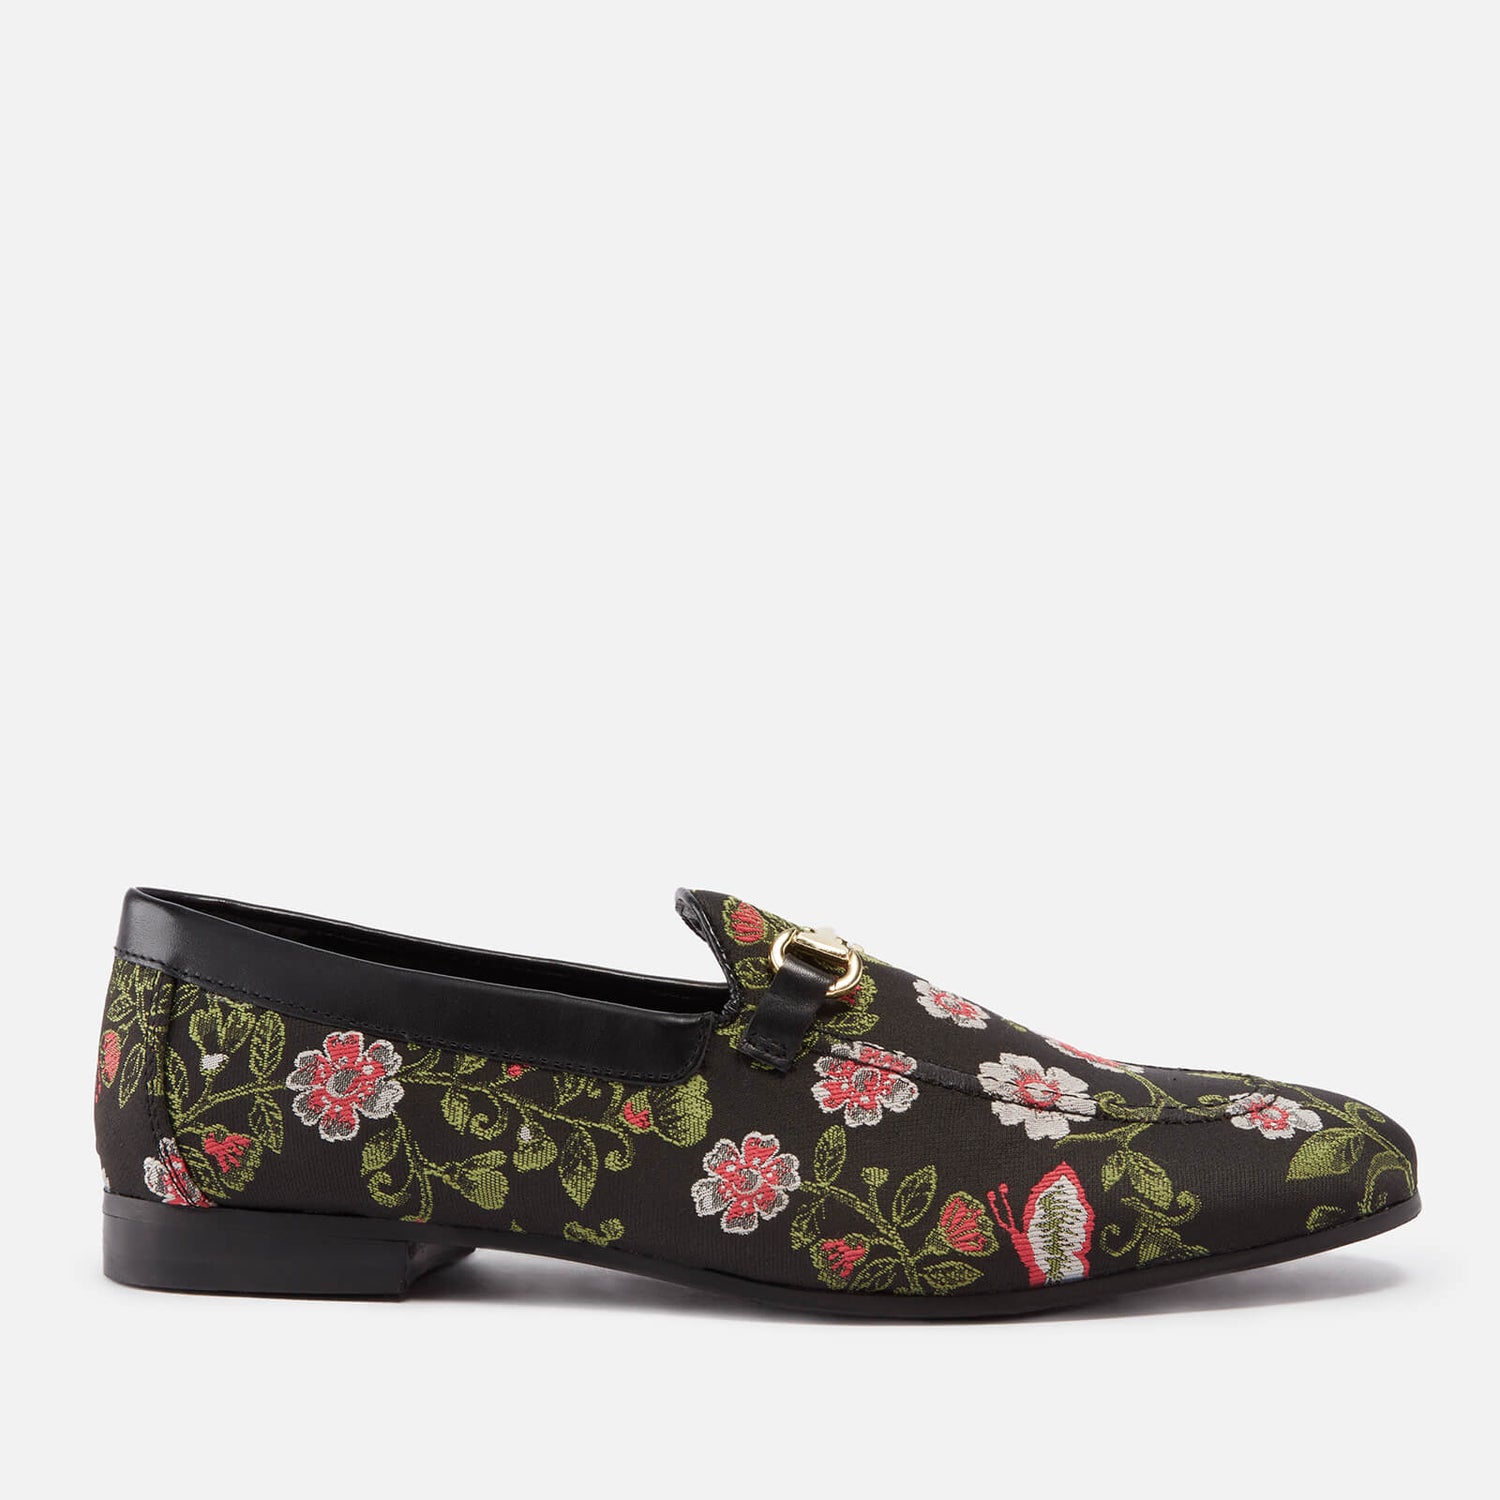 Walk London Joey Floral Canvas Loafers - 7